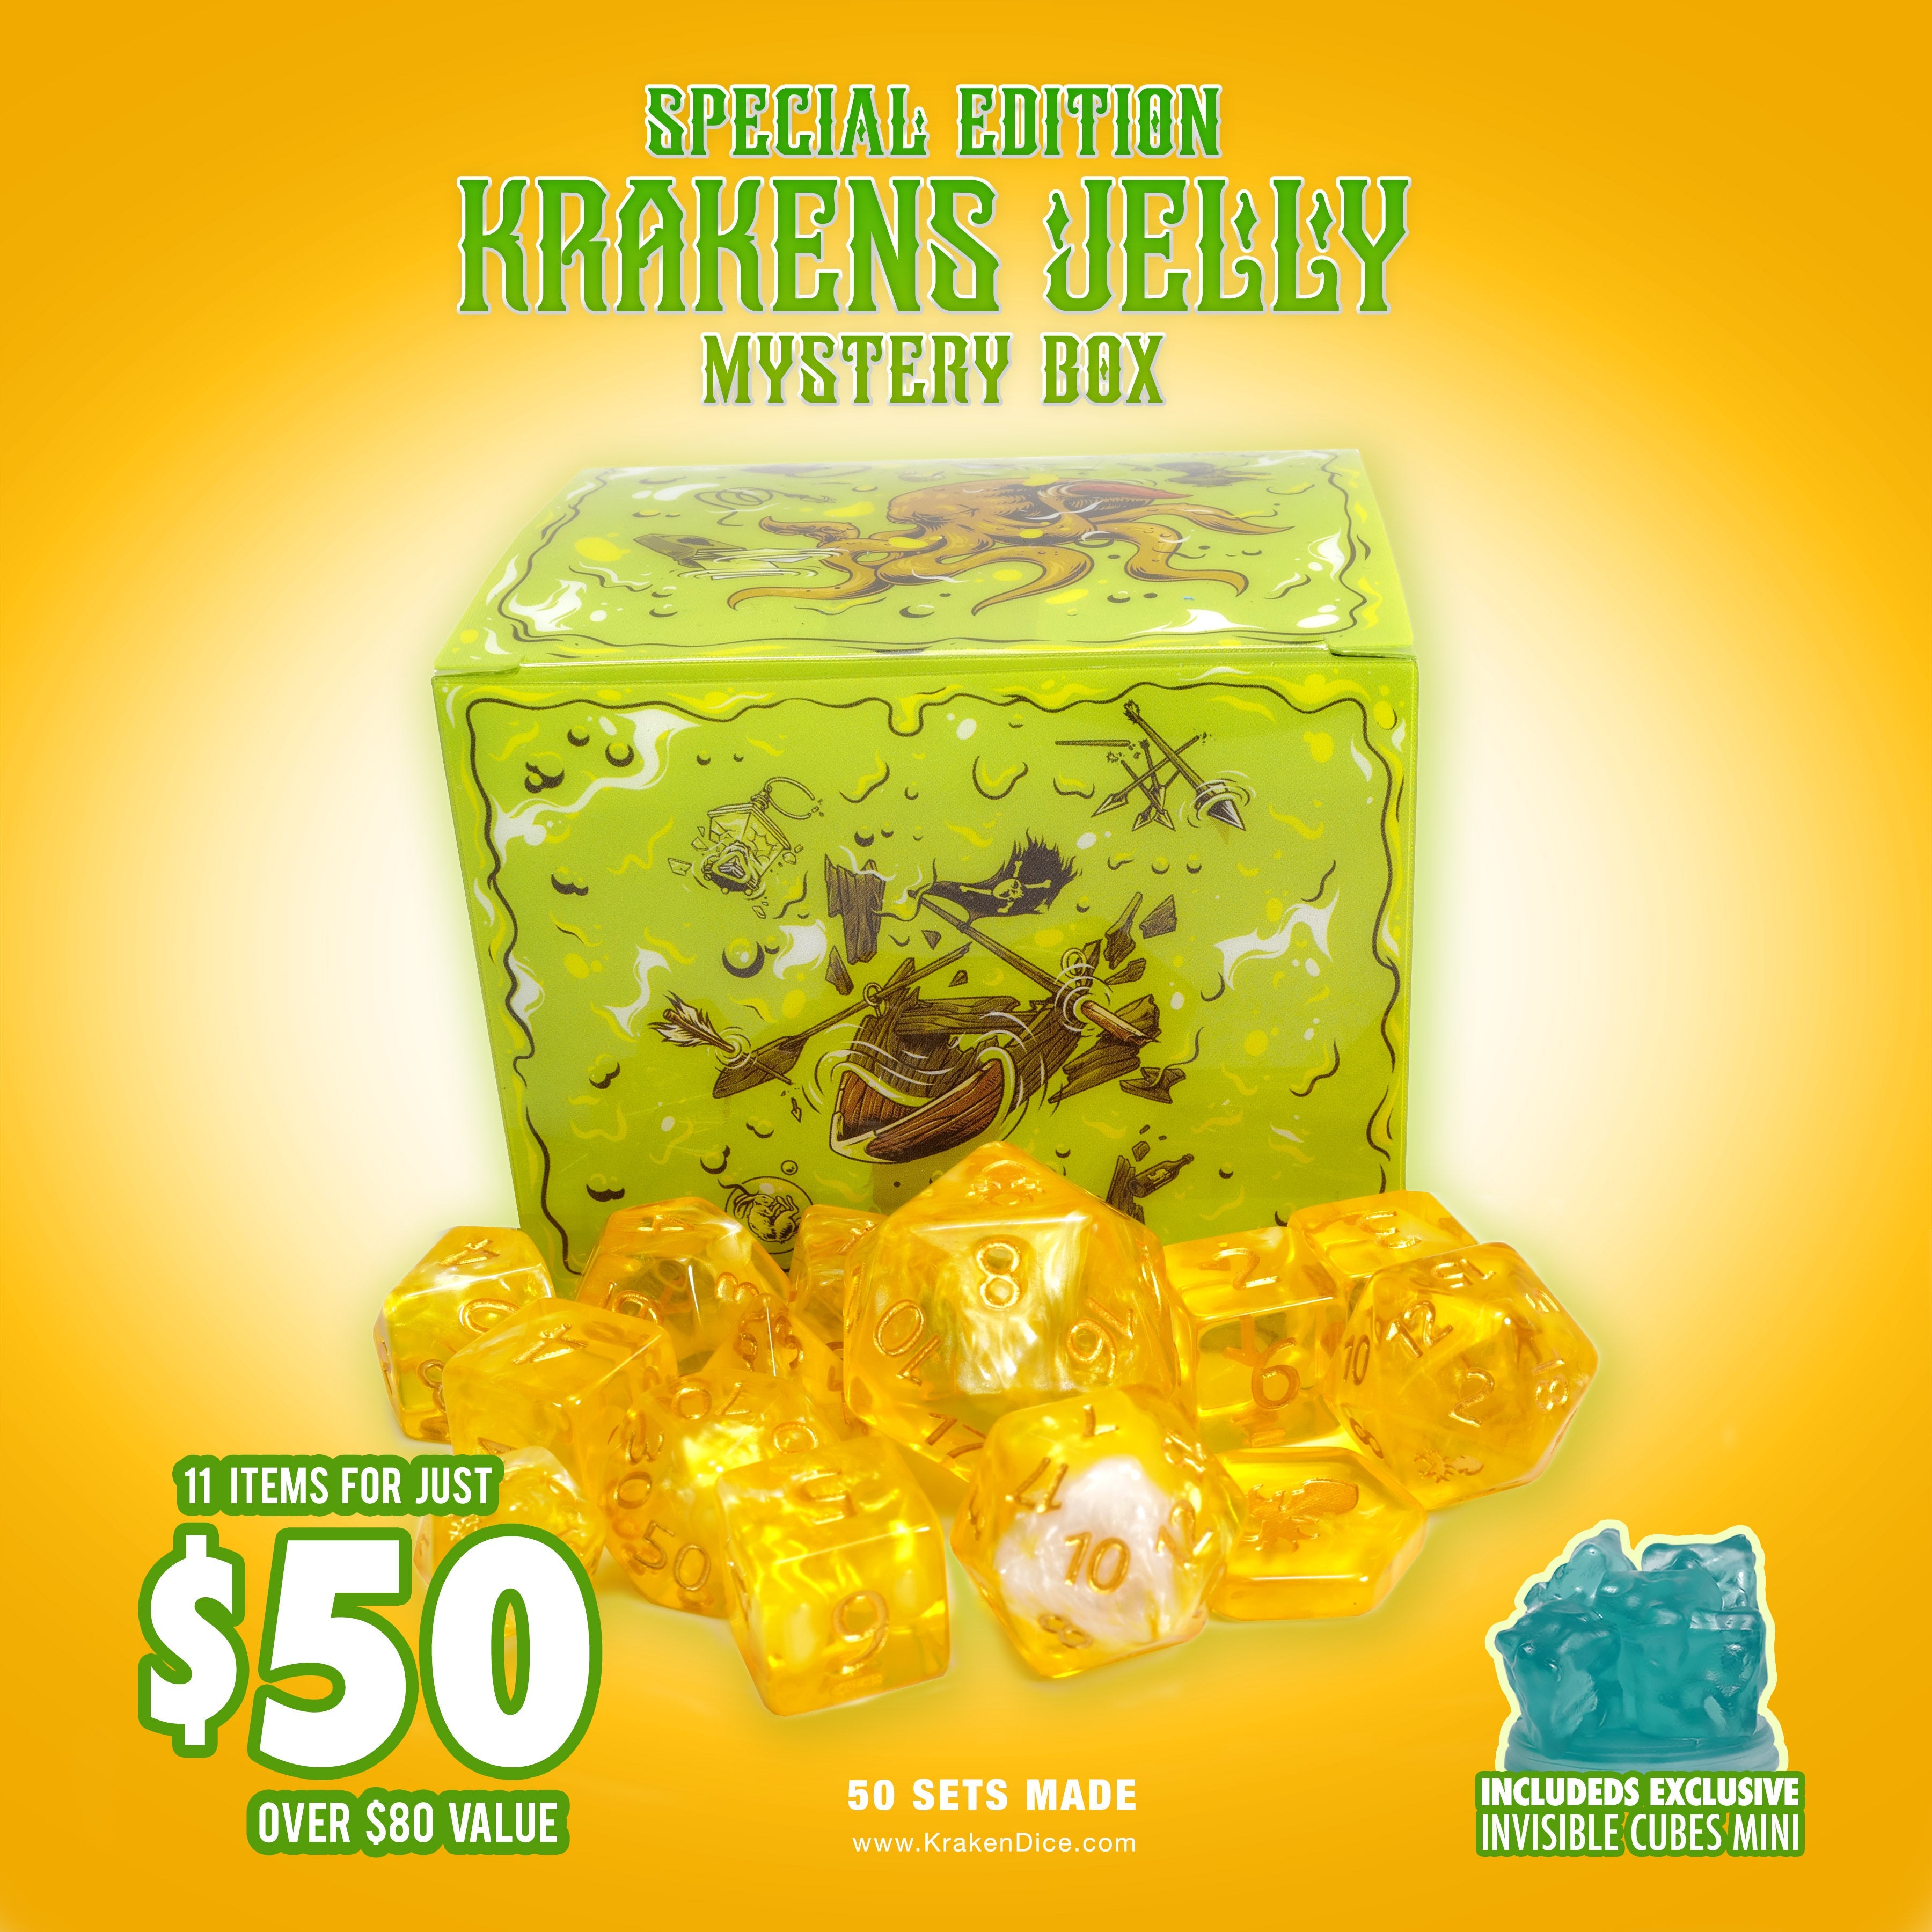 Special Edition Kraken's Jelly Mystery Box